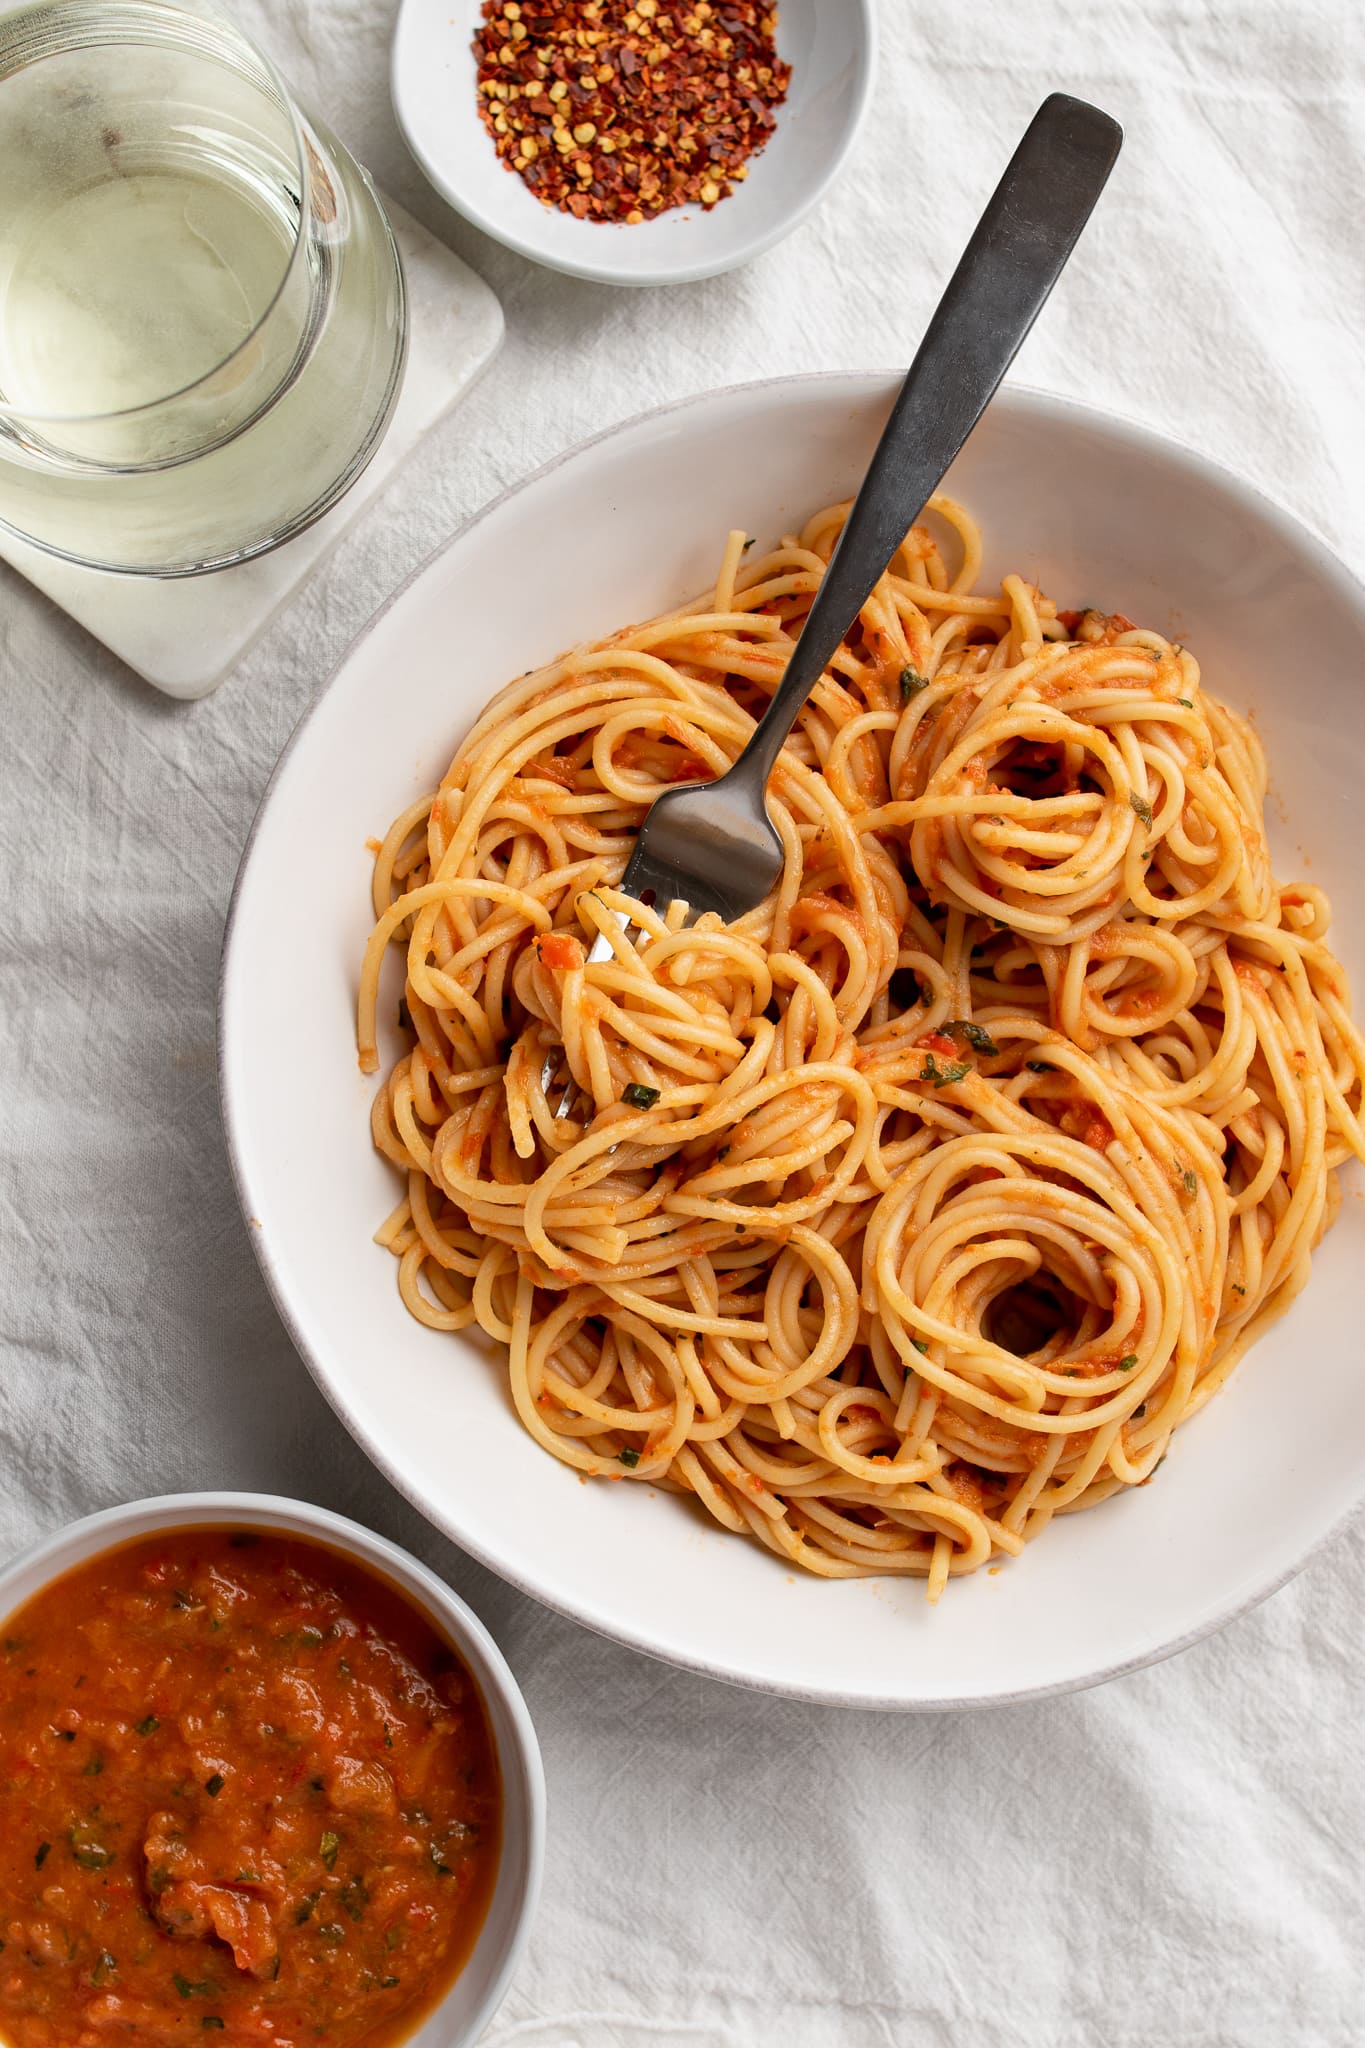 roasted red pepper sauce on pasta